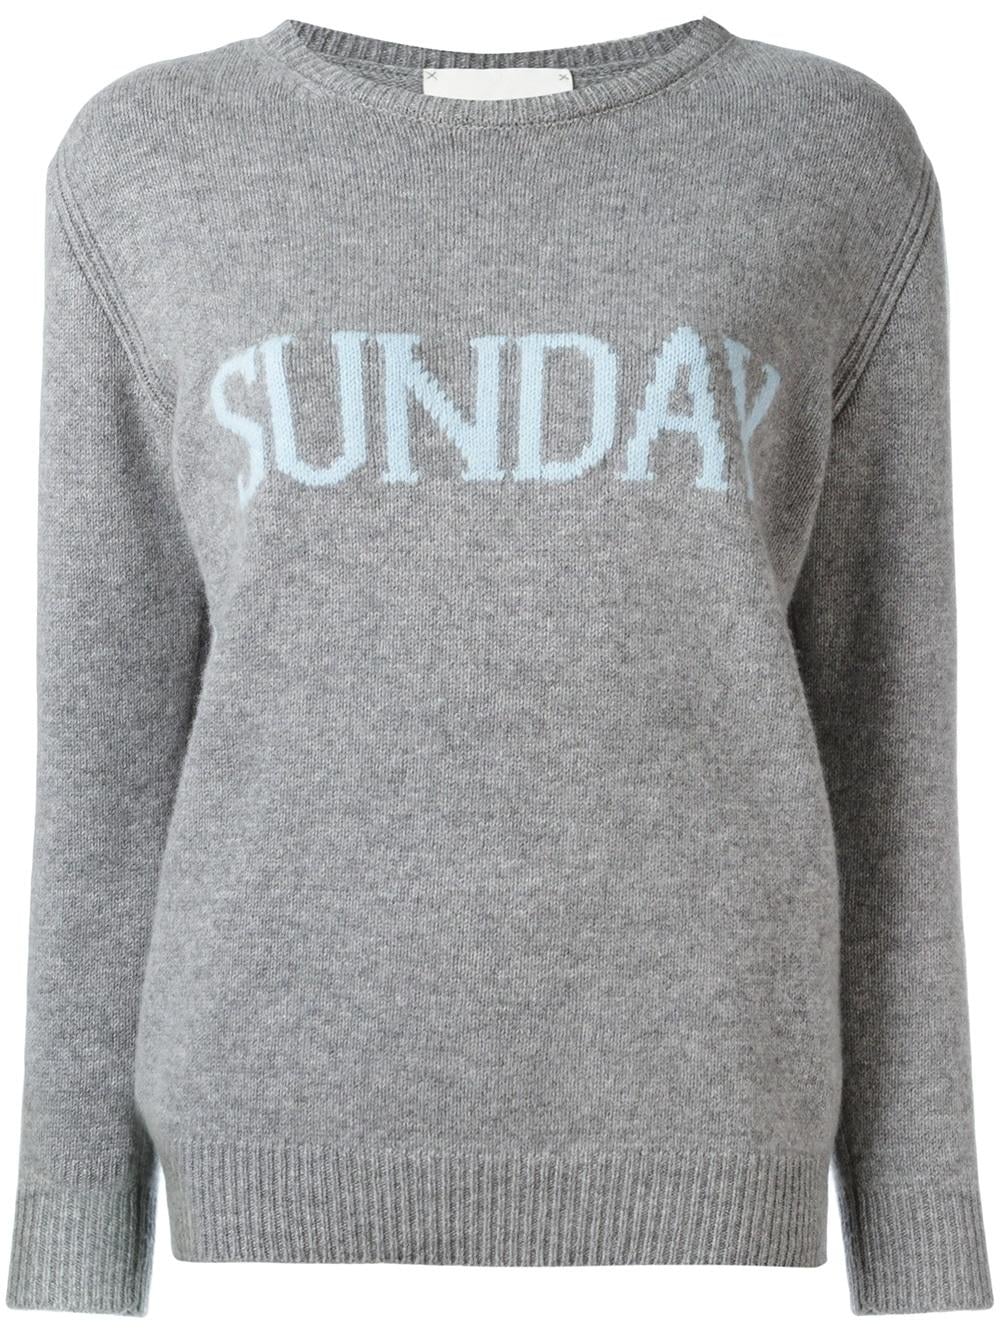 Ferretti Sunday Jumper ($495) | Clooney's Is Chic as Can Be — Until You Her Sweater | POPSUGAR Fashion Photo 8